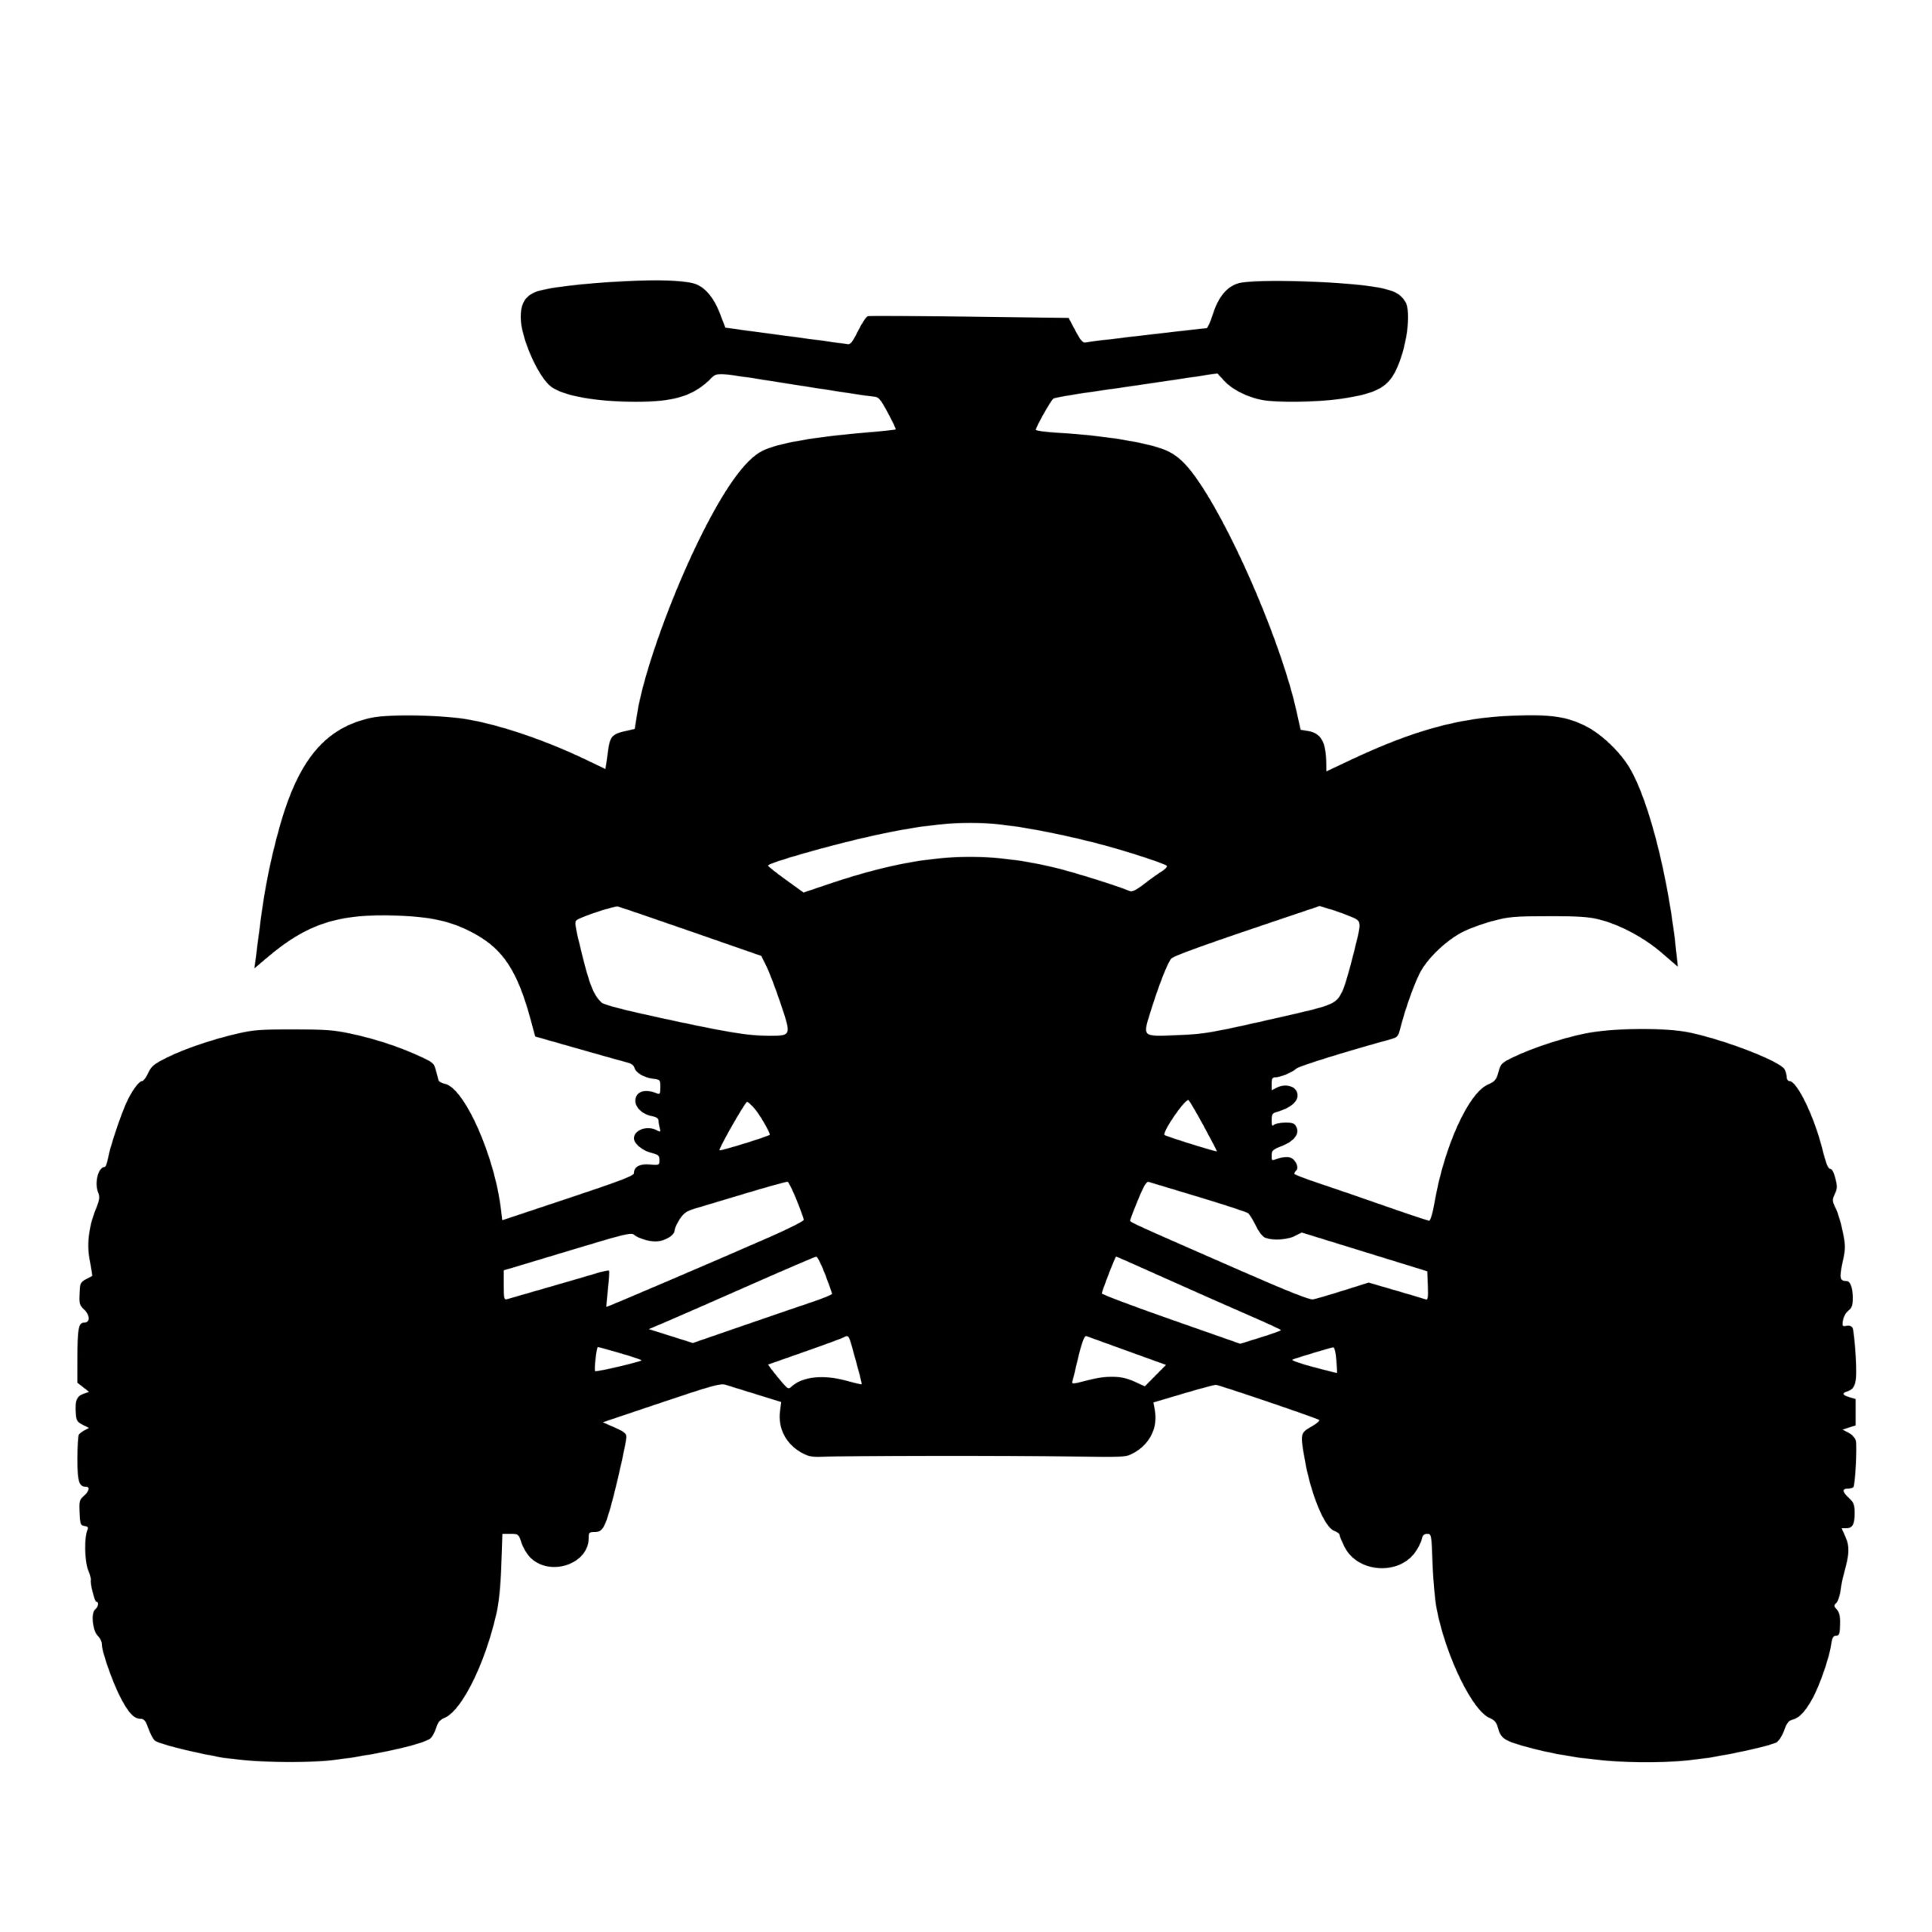 Off-road Racer SVG: Instant Download for Cricut, Silhouette, Laser Machines